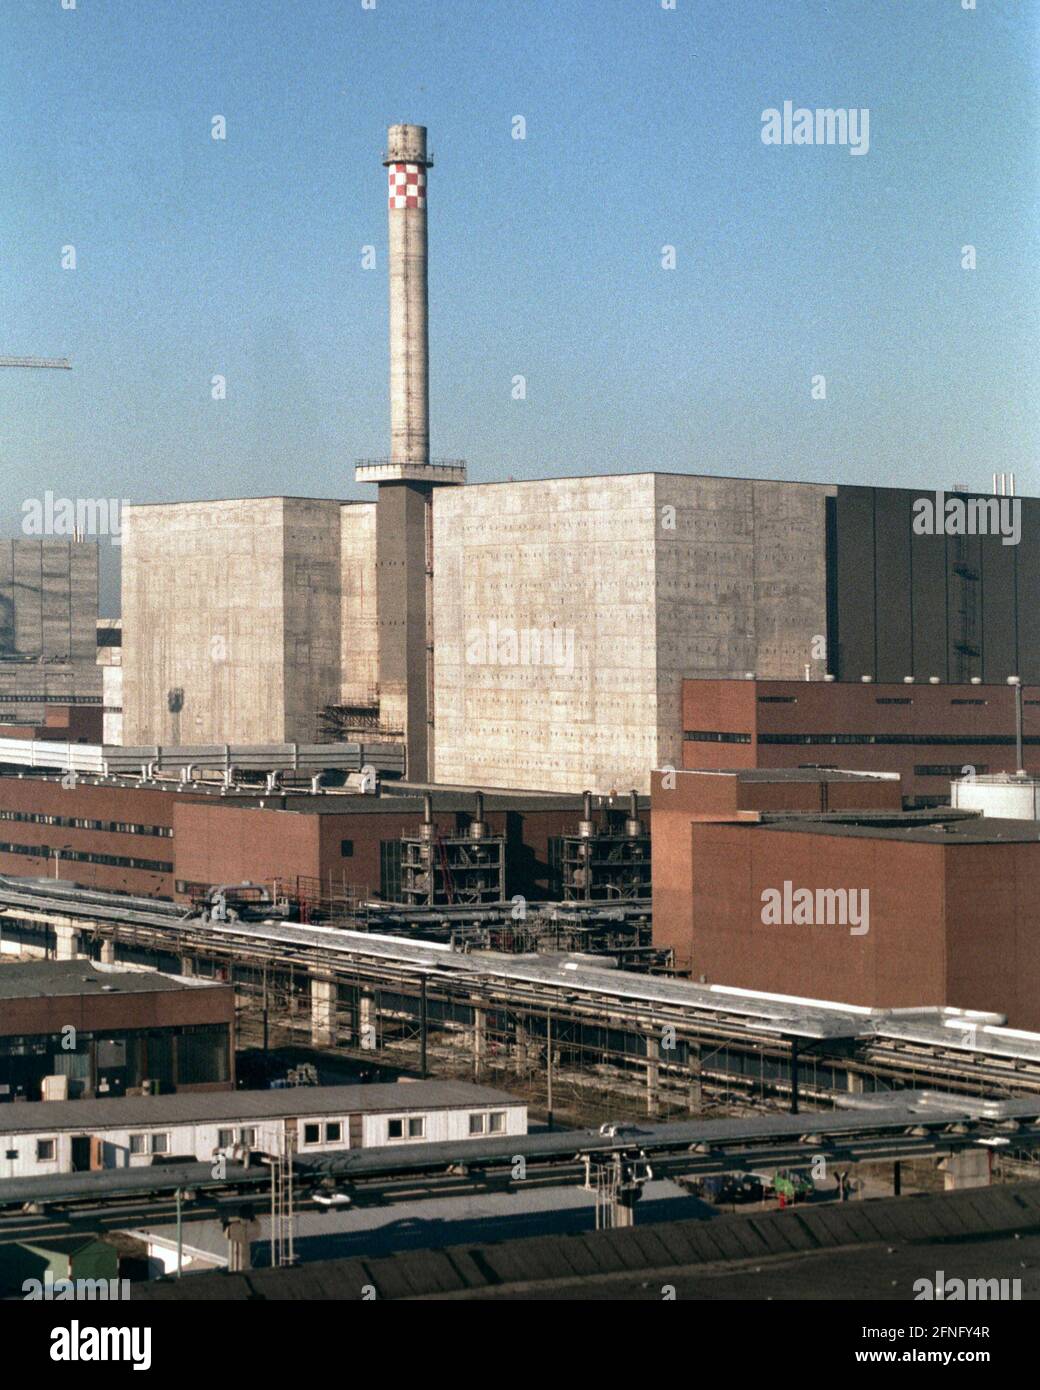 Mecklenburg-Western Pomerania / GDR / 1990 Lubmin nuclear power plant near  Greifswald. Block 5 is still under construction. A short time later, the  power plant is shut down for safety reasons. Later,